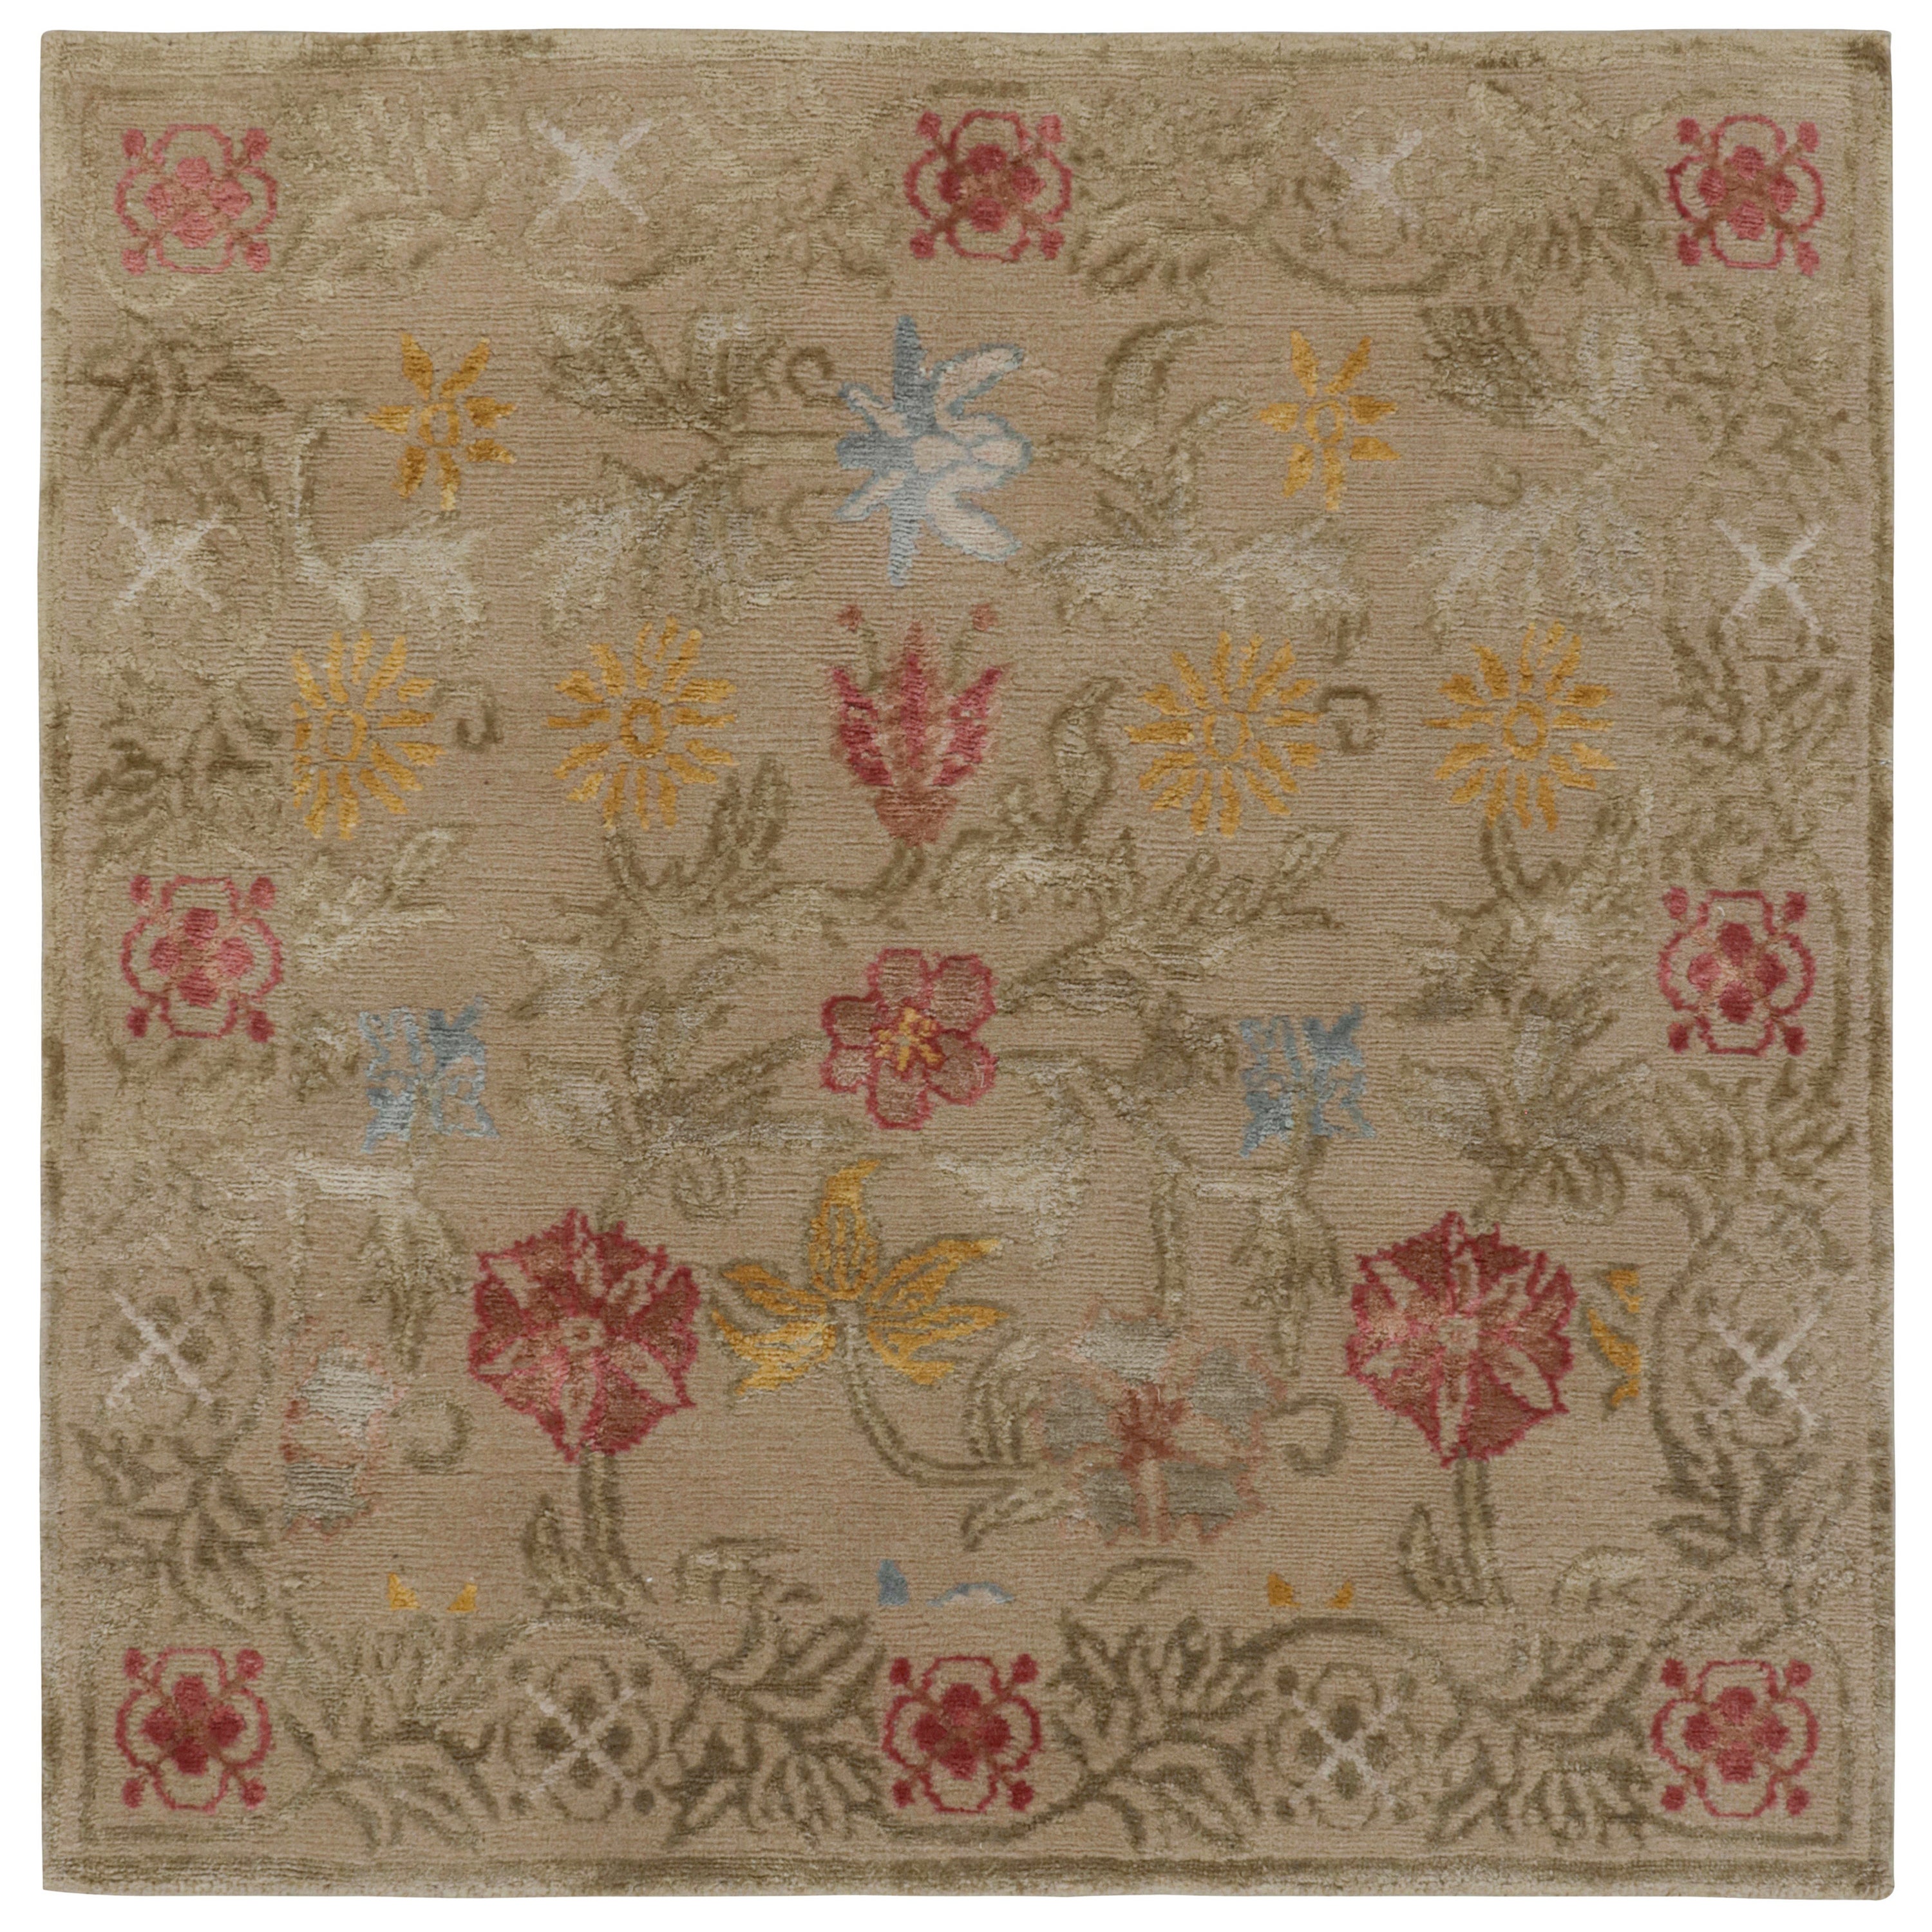 Rug & Kilim’s Spanish European Style Square Rug with Floral Patterns “Bilbao” For Sale